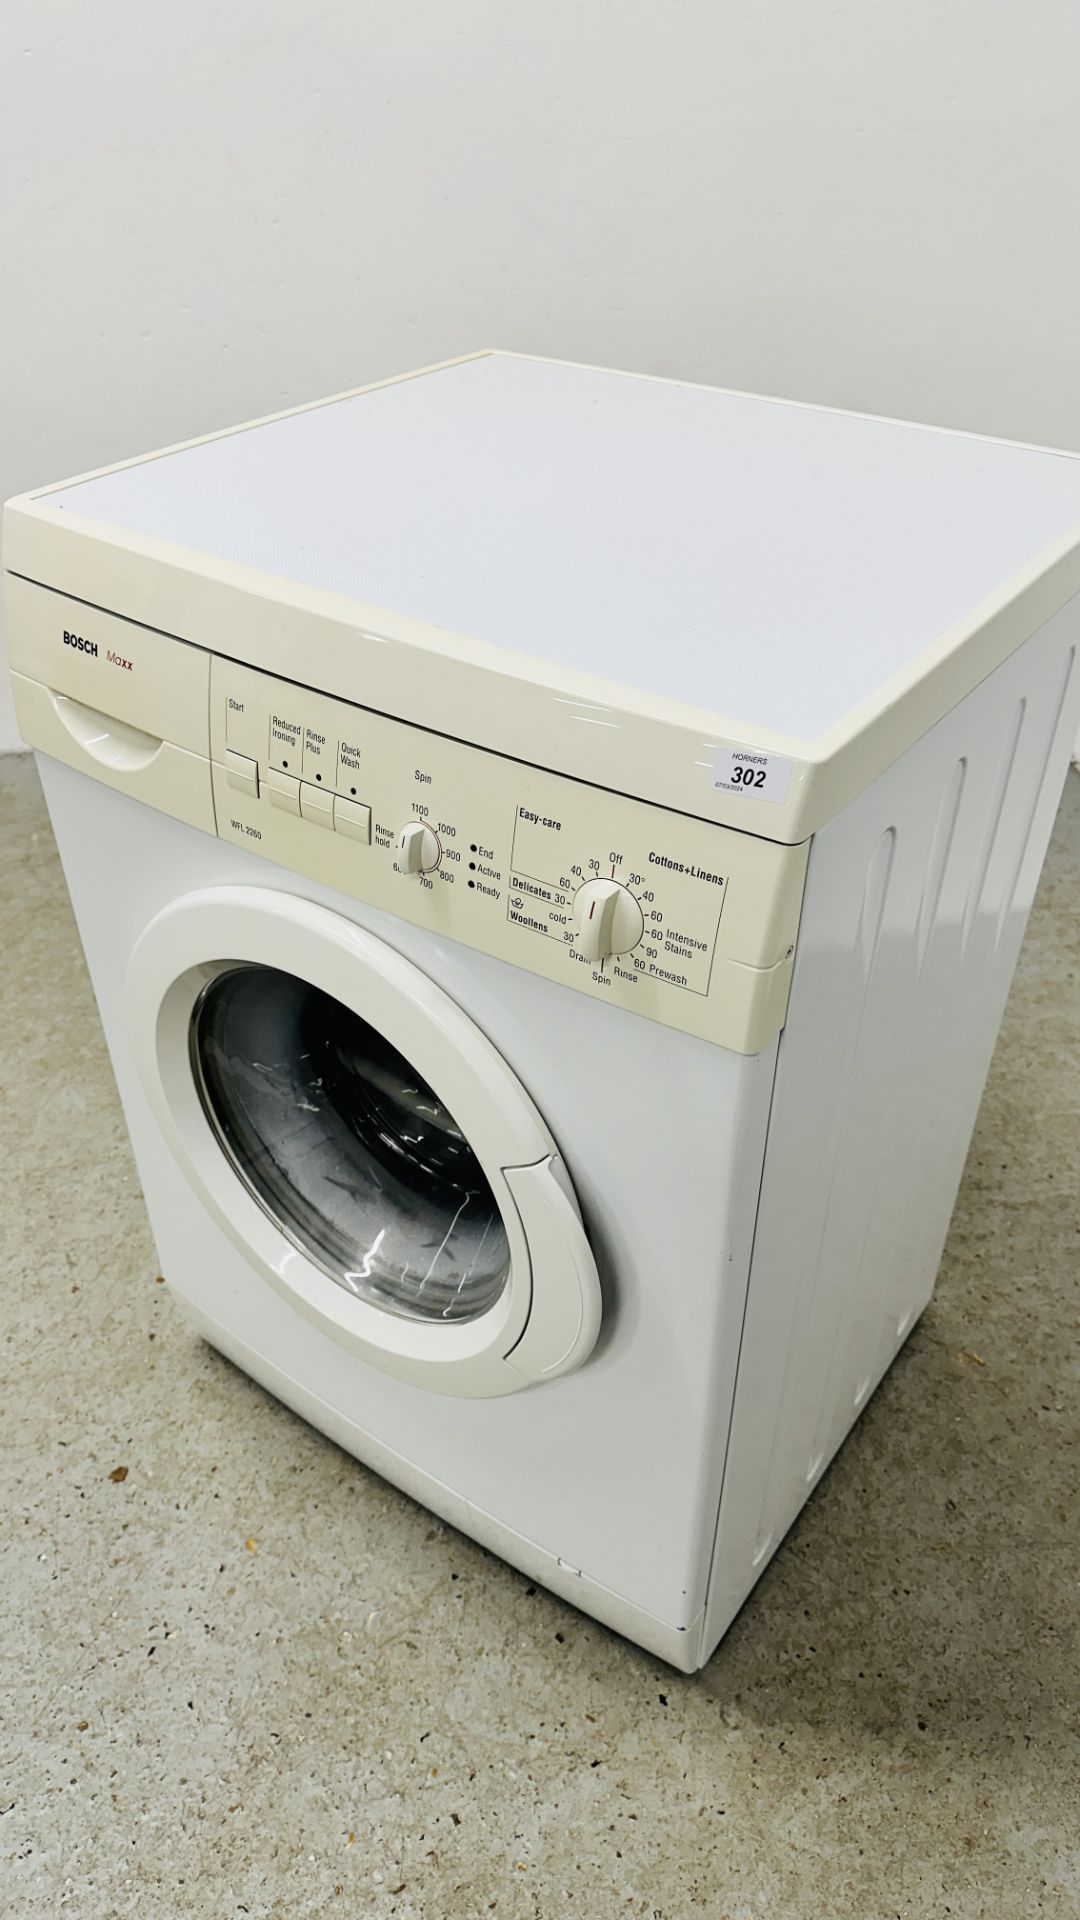 BOSCH MAXX WASHING MACHINE MODEL WFL-2260 - SOLD AS SEEN. - Image 5 of 6